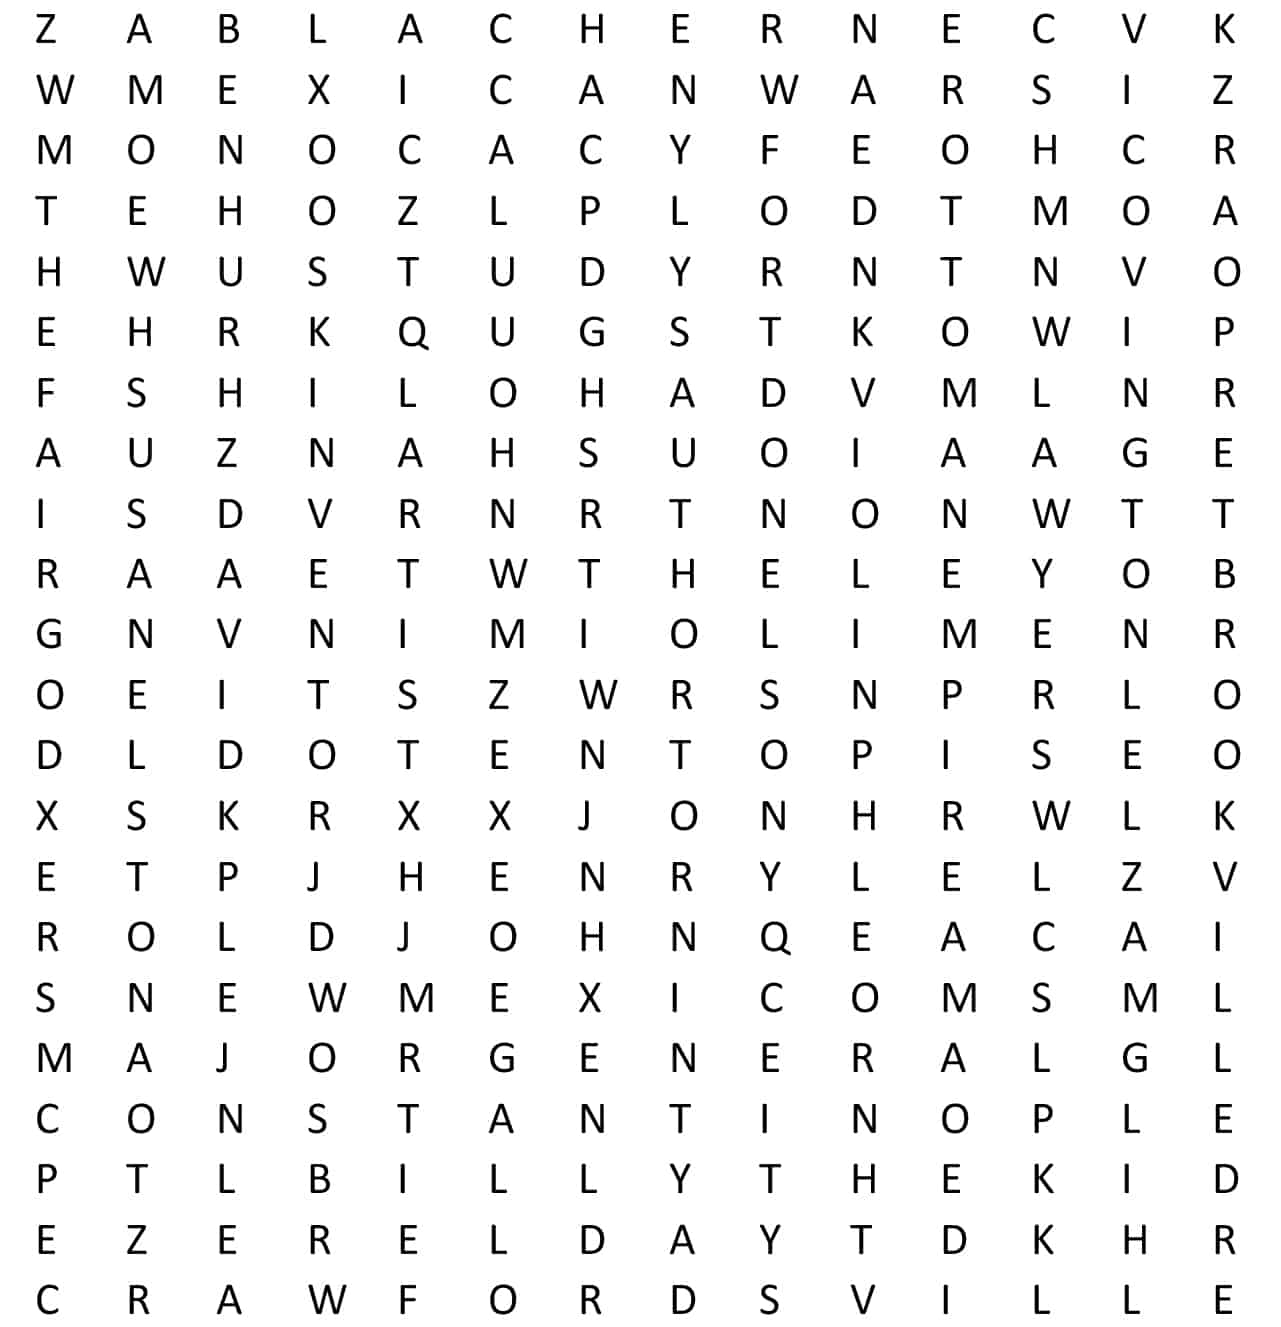 Word search image for the Lew Wallace activity book